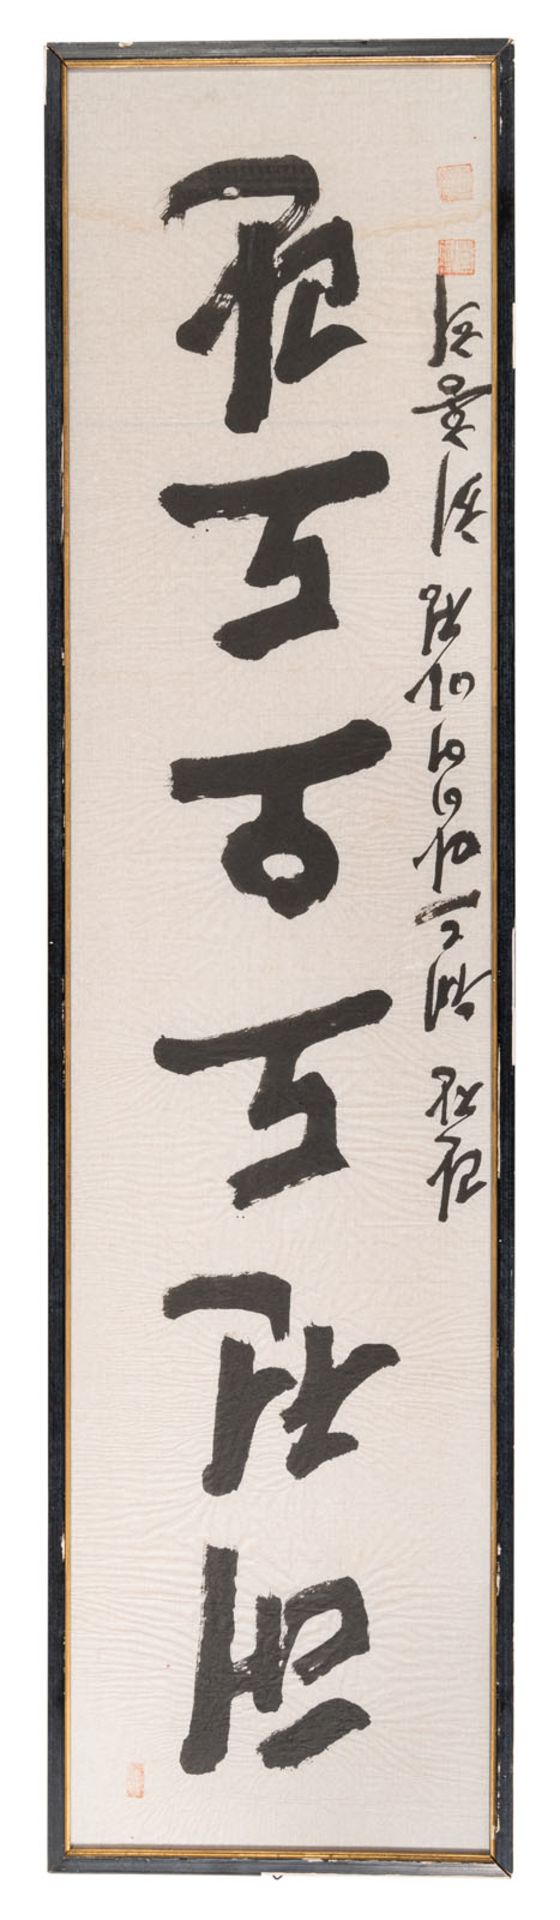 A KOREAN CALLIGRAPHY SCROLL - Image 4 of 4